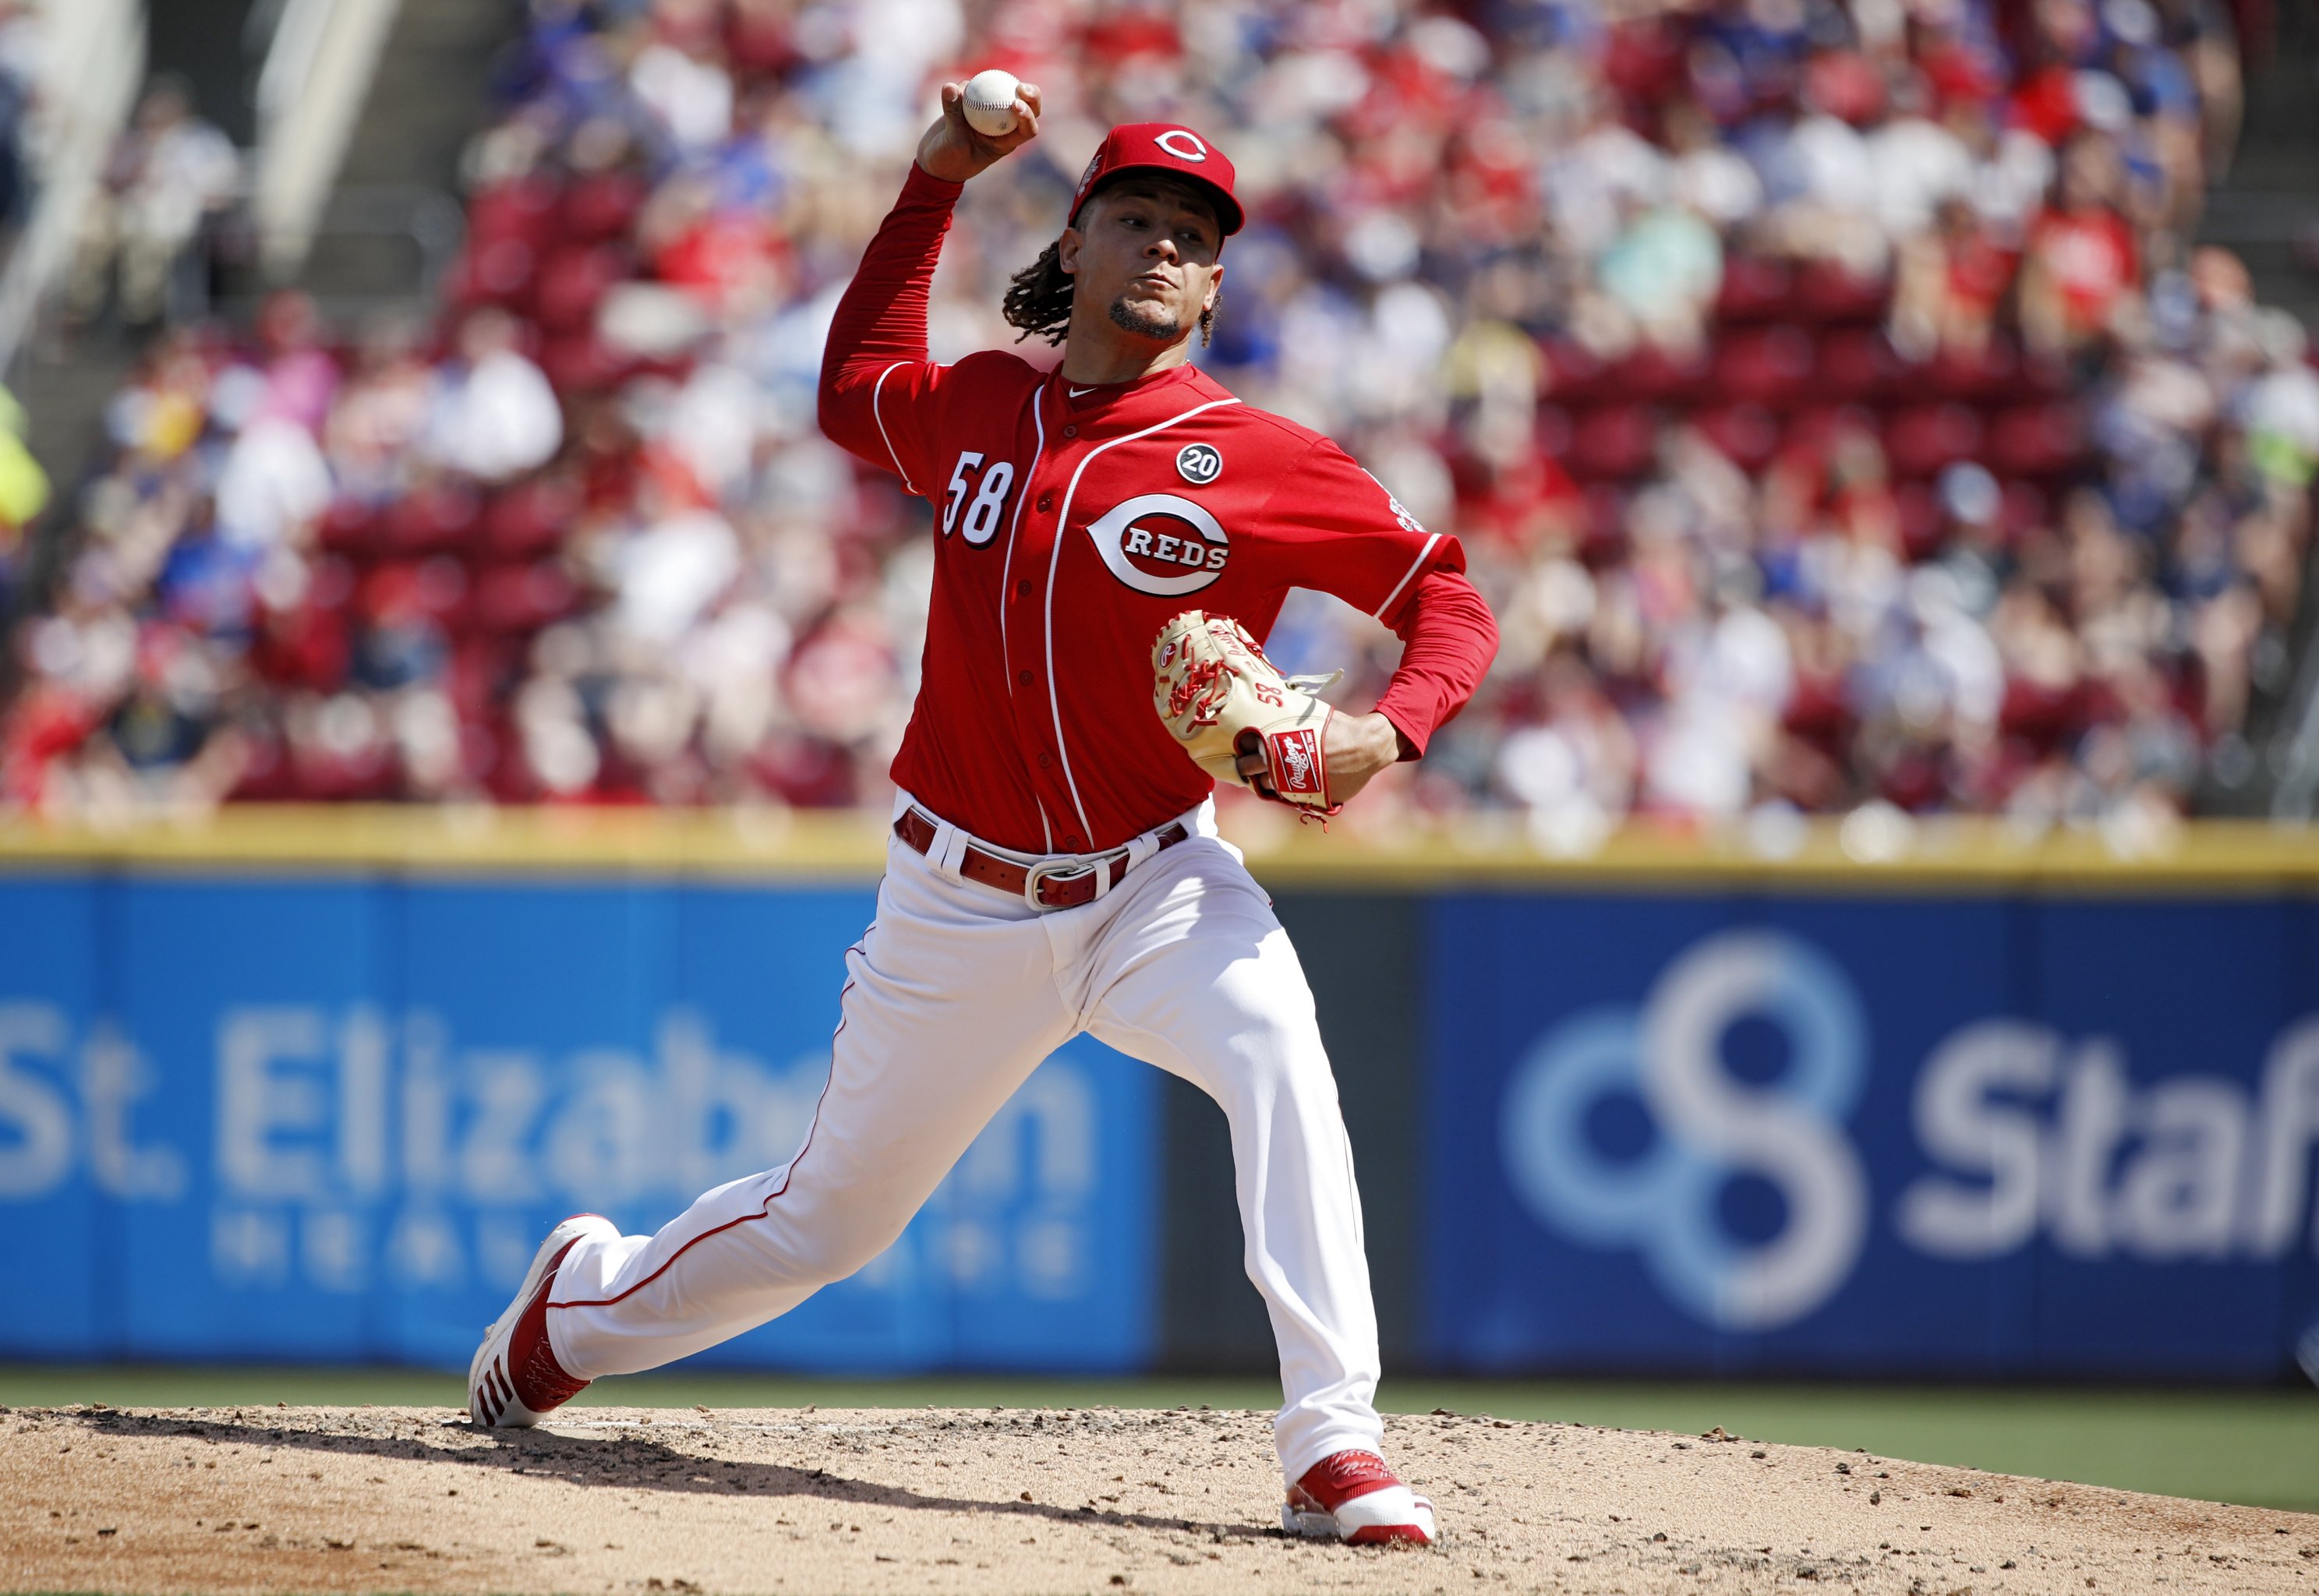 Yohan Ramirez's Best Weapon Was on Full Display Against Reds (+)